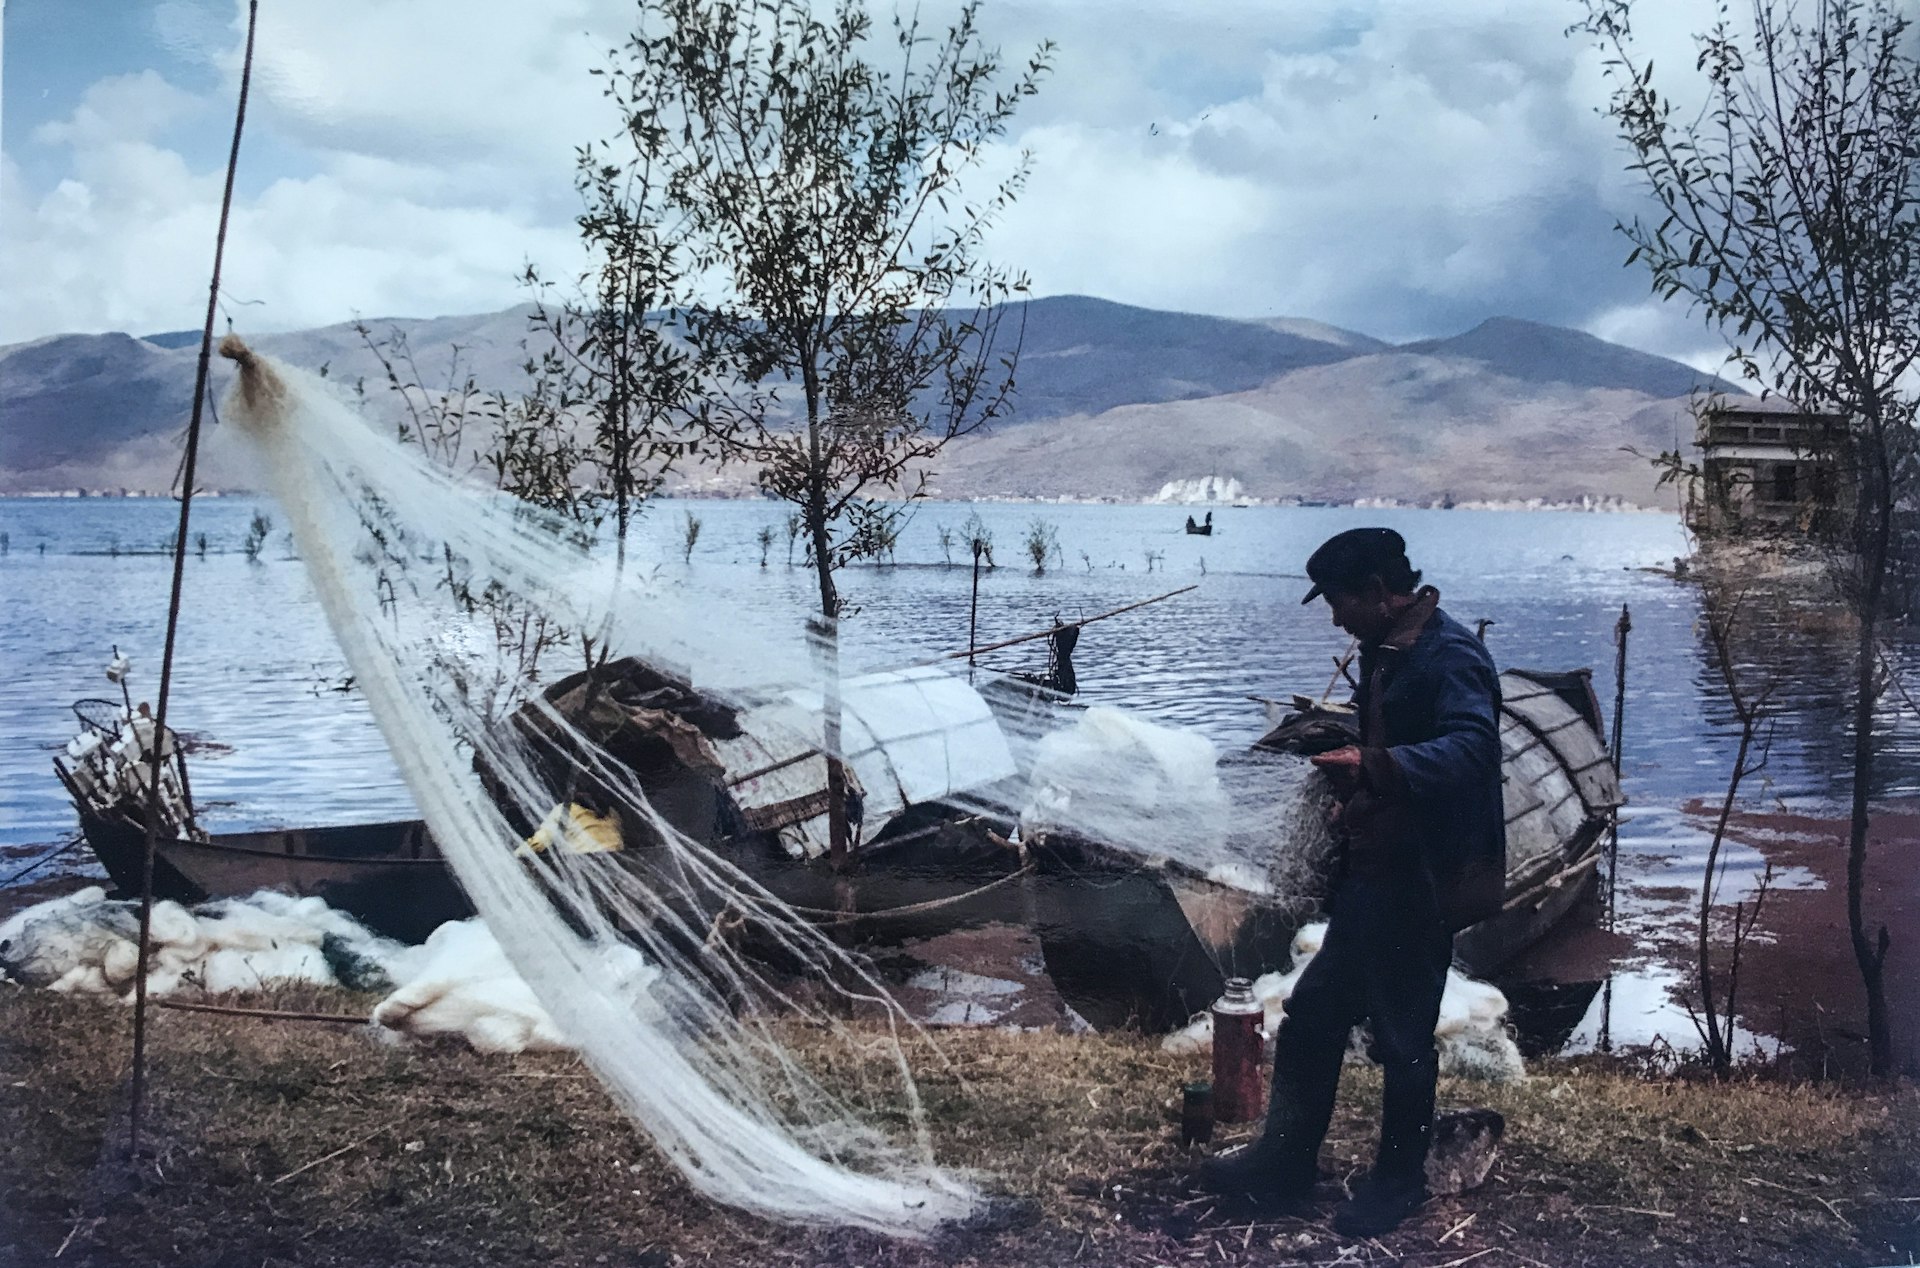 A fisherman detangles his nets on the banks of a river. He's wearing an overcoat and a black cap. The sky is blue and scattered with white clouds and the other bank of the river is in the background of the image. Hilly peaks frame the river. Two boats are moored on the bank next to the fisherman.